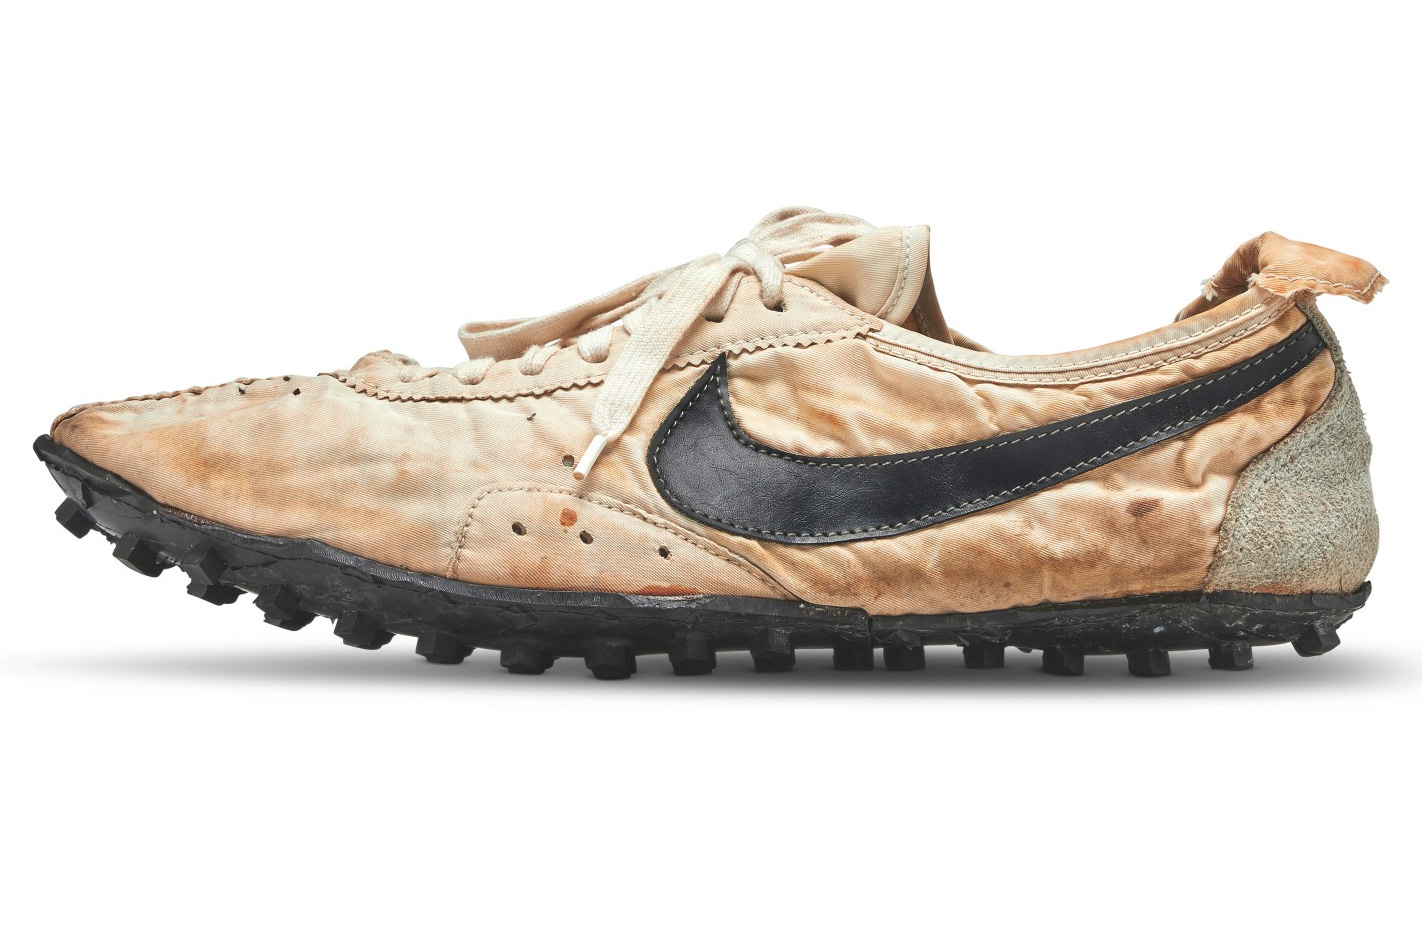 Sotheby's auction 100 of the World's Rarest Sneakers including the Nike Moon shoe @ The Deffest